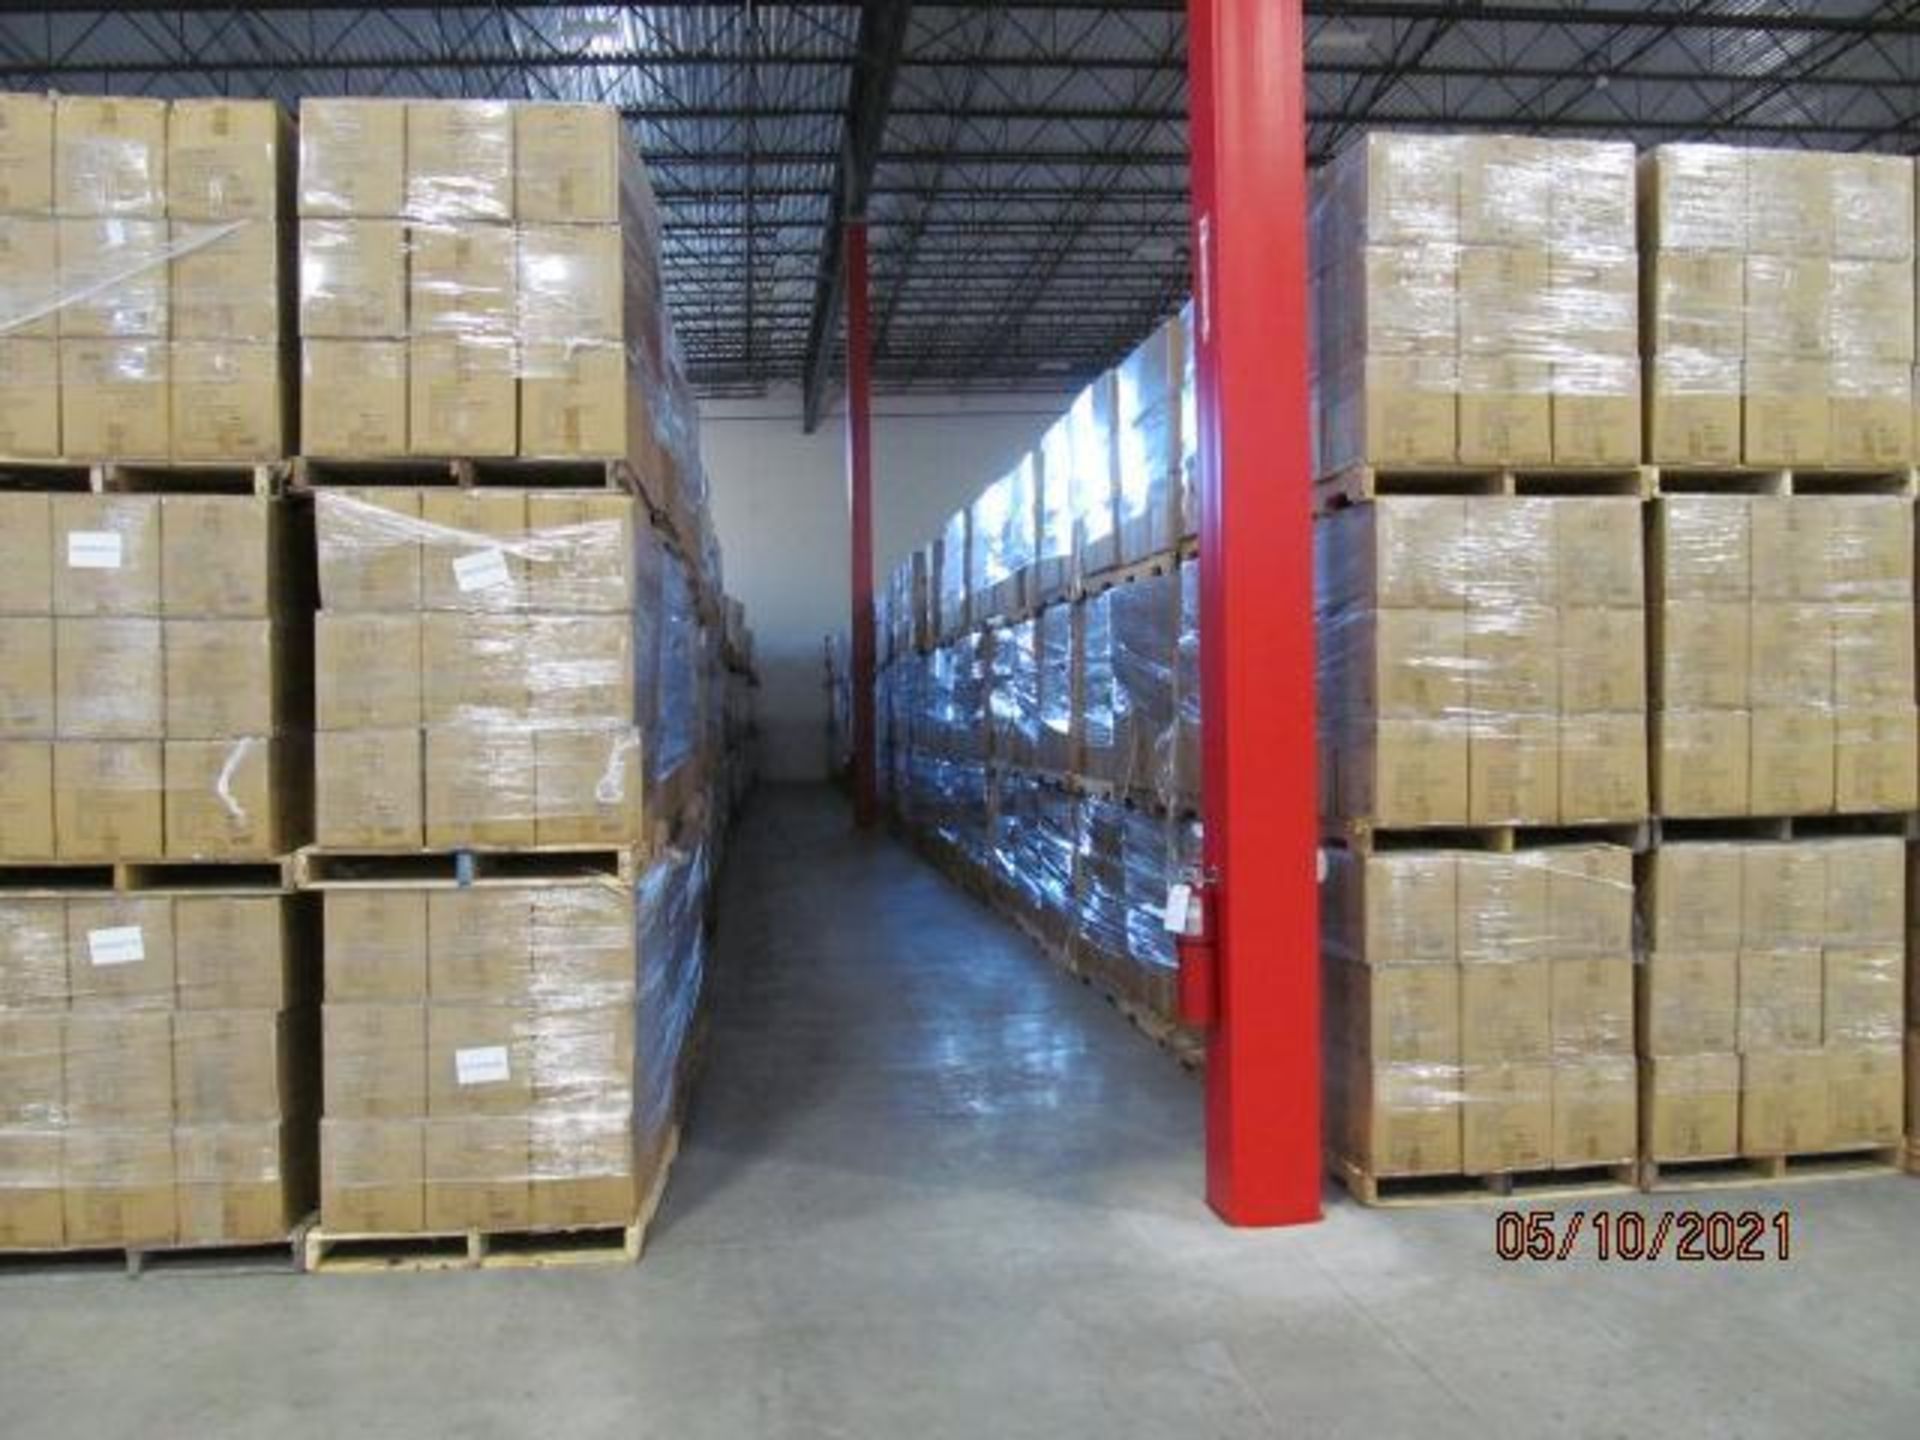 Lot of Waxman Kleen Freak Sanitizing Wipes consisting of 134,784 packages on 208 pallets. Each packa - Image 9 of 11